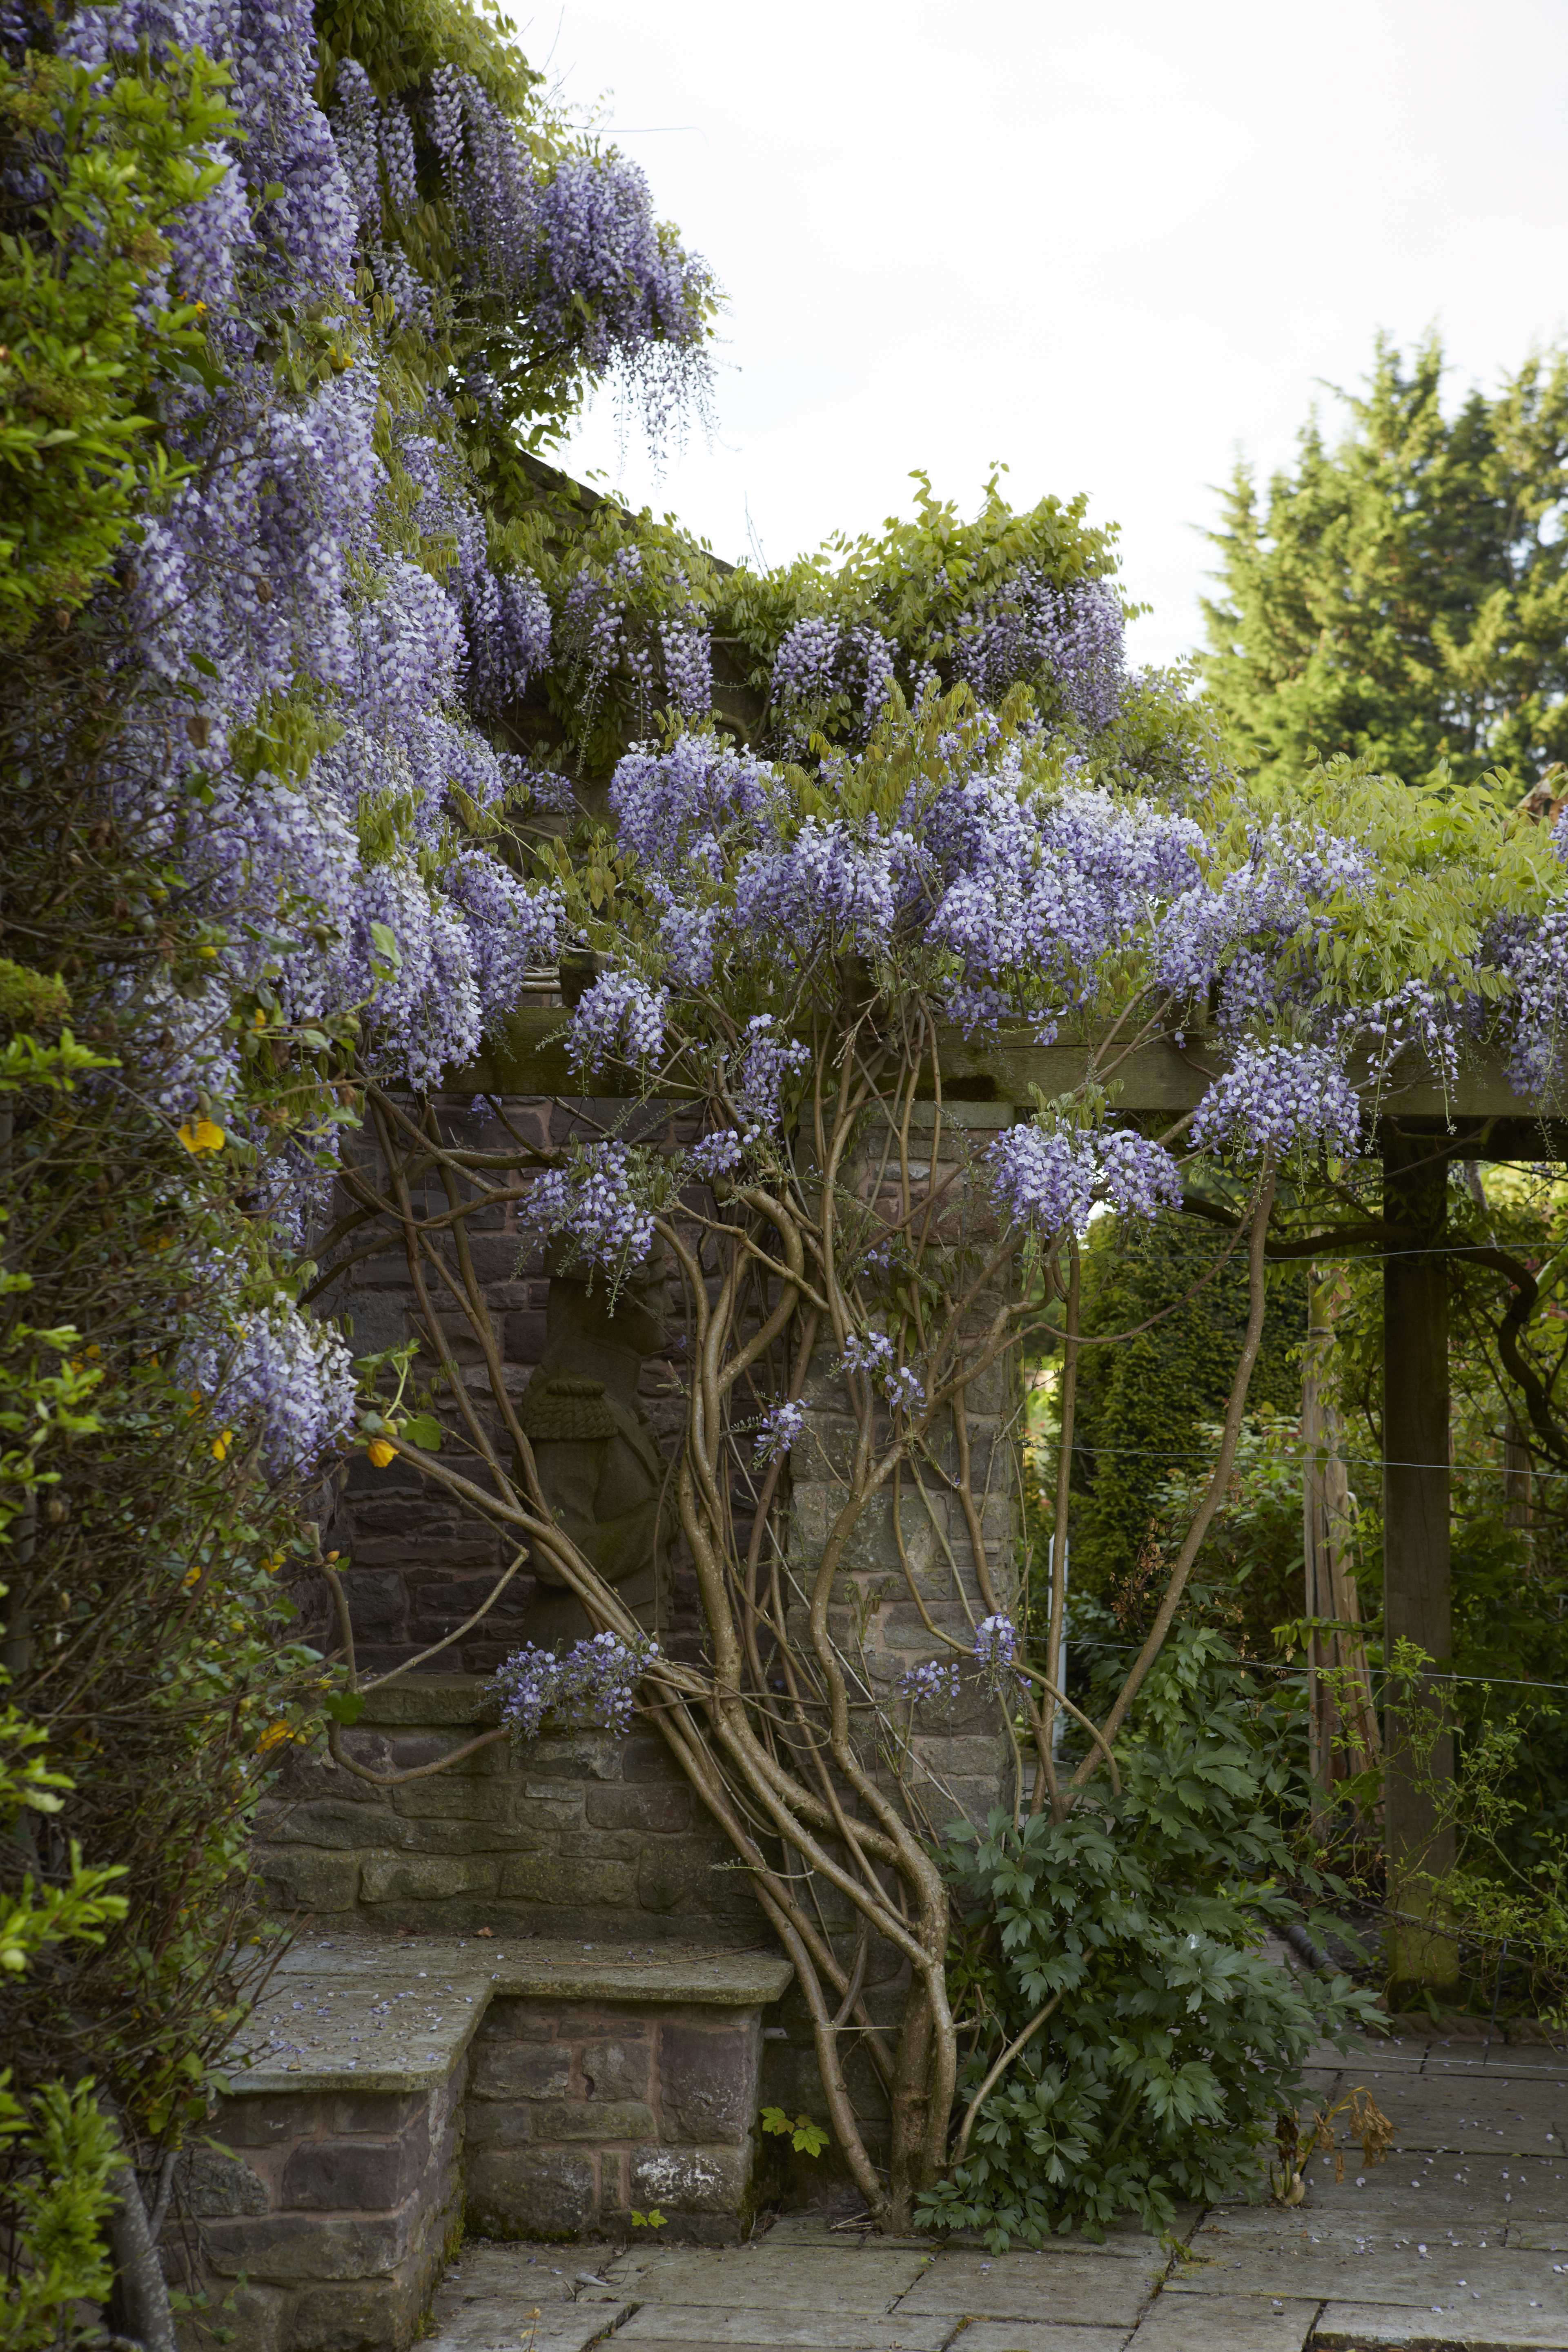 How Long Does Wisteria Bloom?